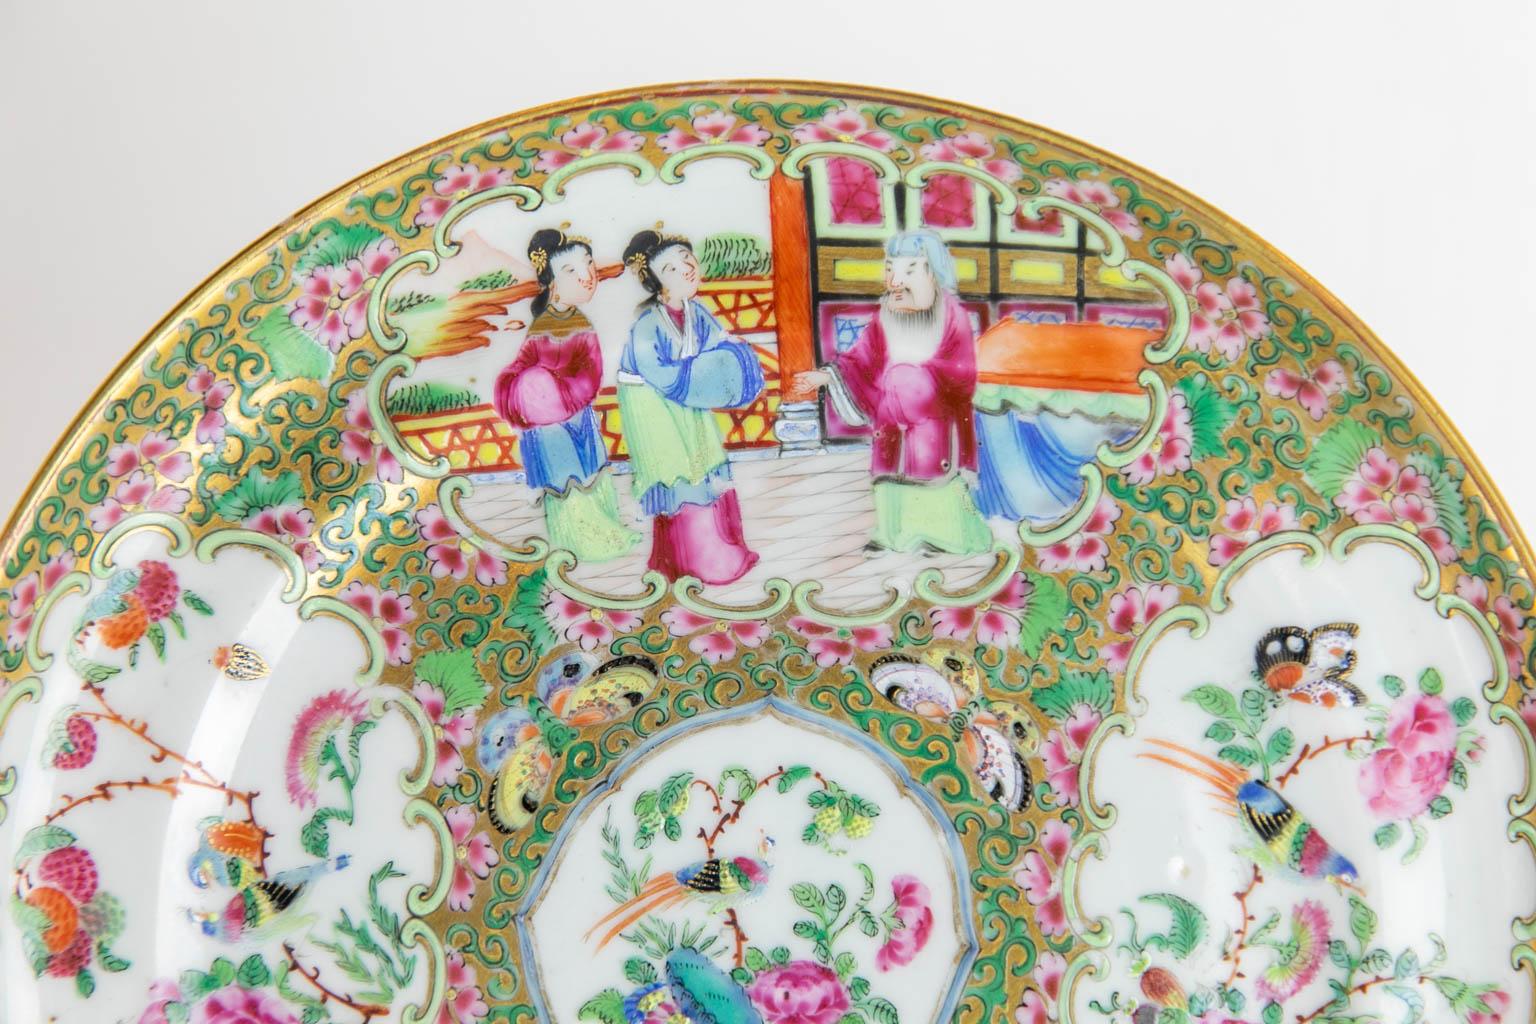 This Chinese plate is in mint condition. There are four cartouches depicting Mandarin figures, birds, butterflies, fruit, and flowers.